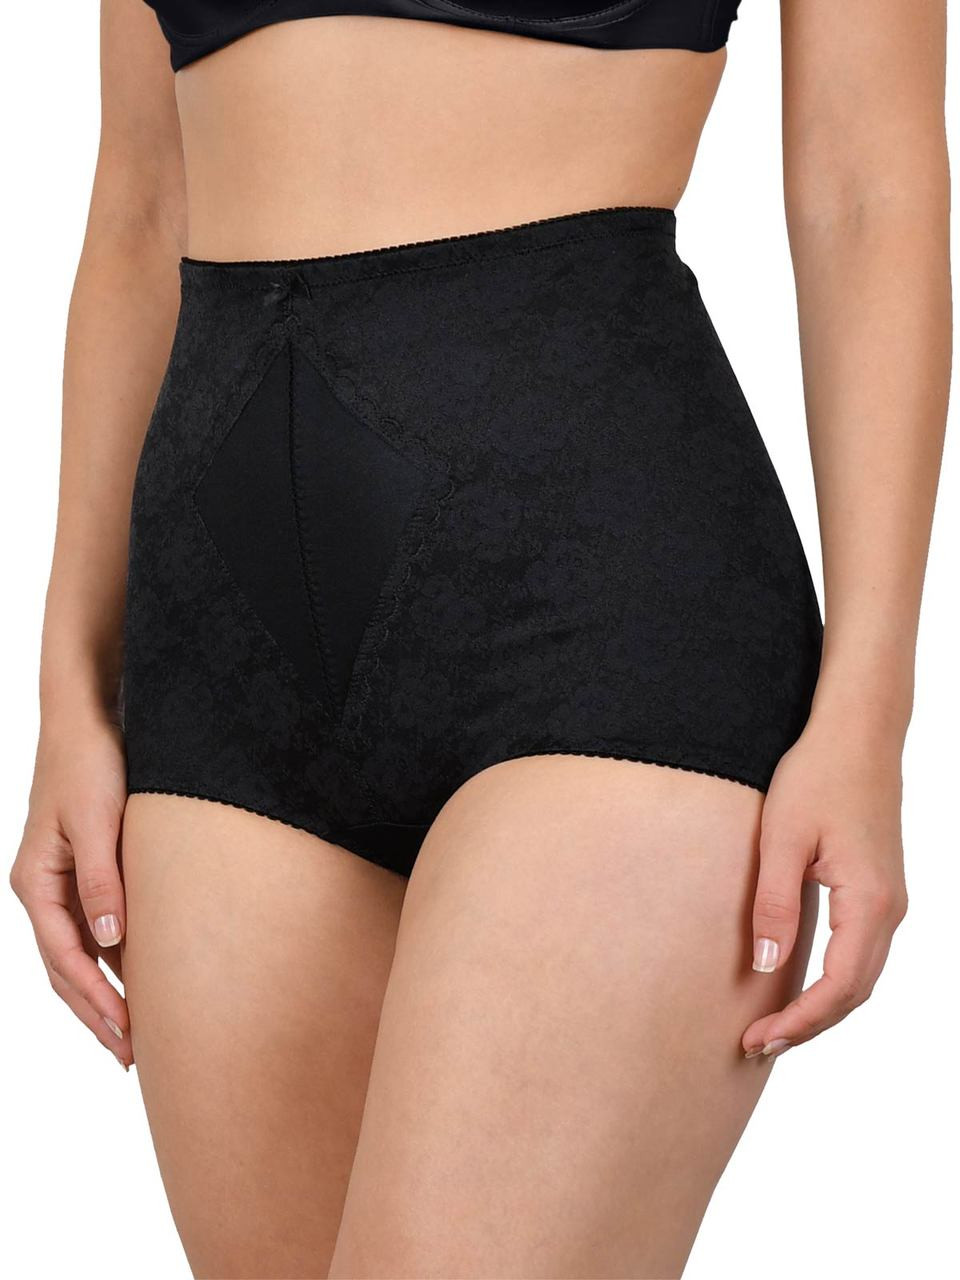 Naturana Panty Girdle With Reinforced Front Panel High Rise Firm Control  (L-5XL) 0184